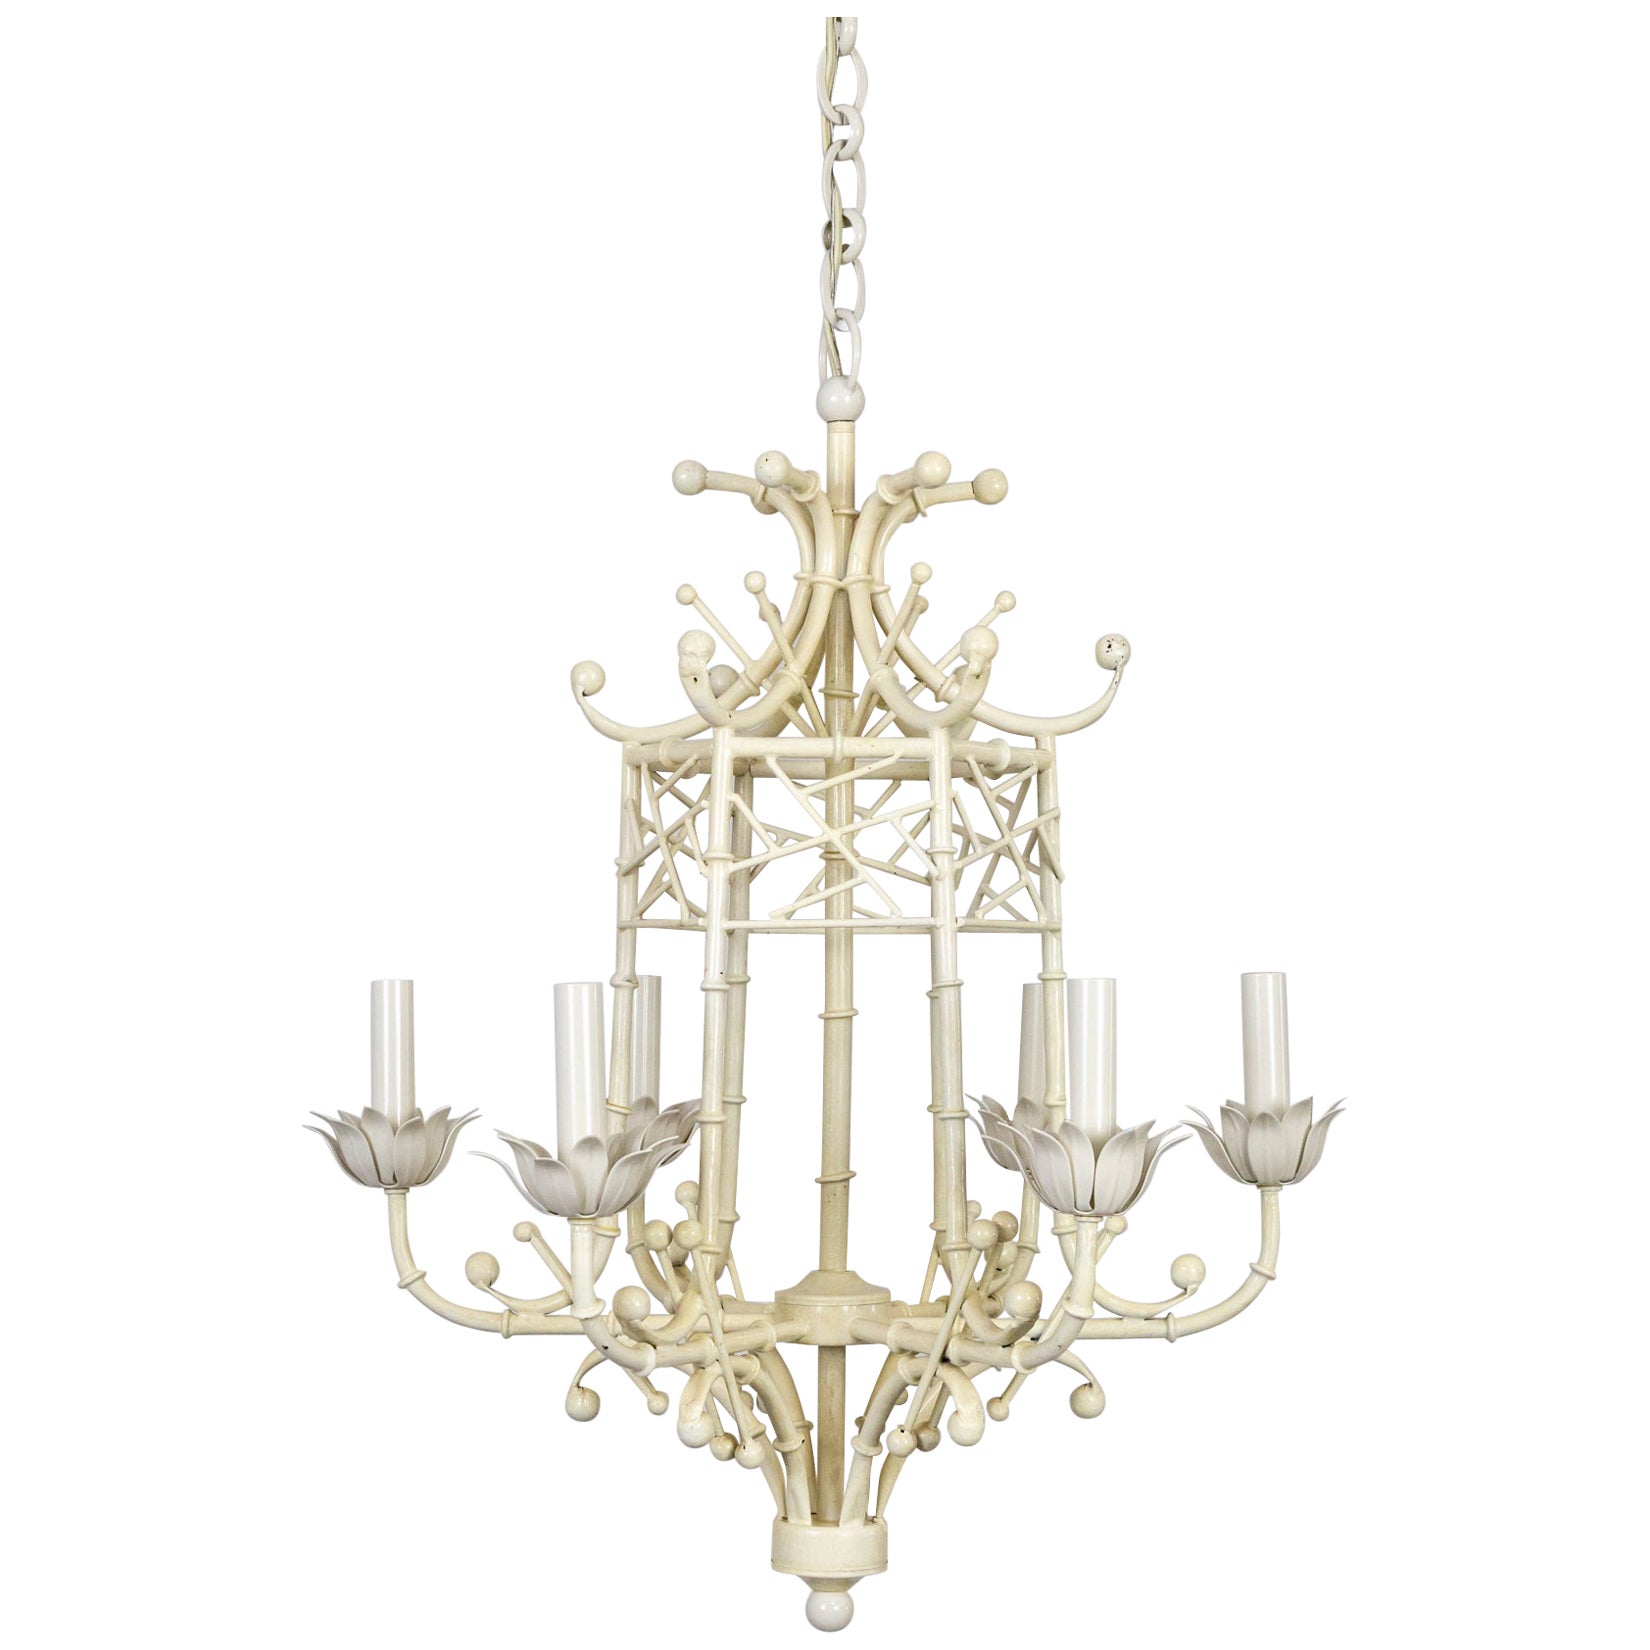 Off-White Lacquered Faux Bamboo Pagoda 6-Light Chandelier 